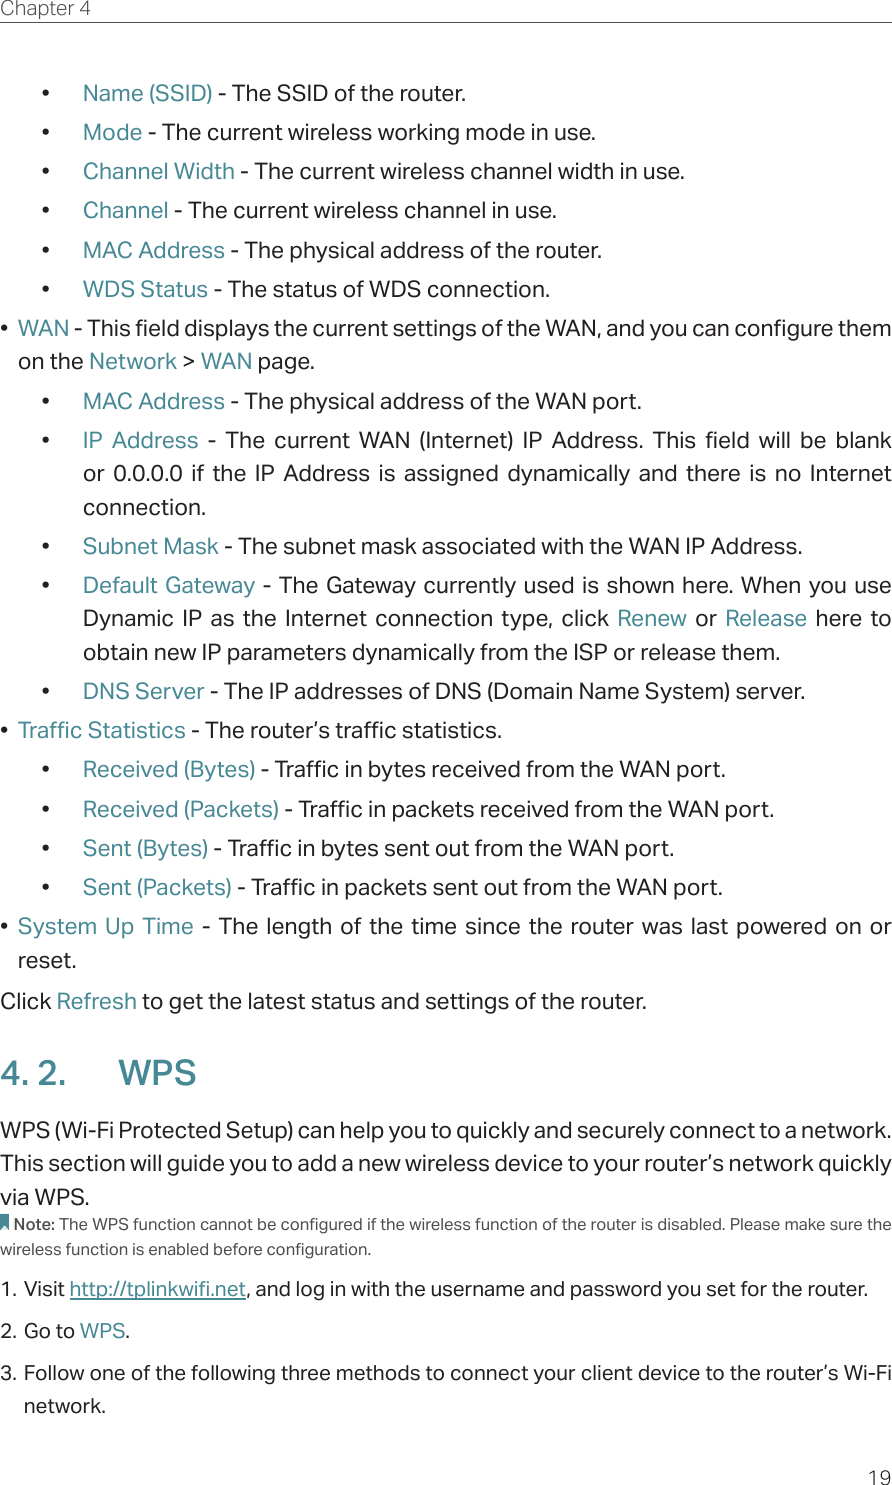 19Chapter 4  •  Name (SSID) - The SSID of the router.•  Mode - The current wireless working mode in use.•  Channel Width - The current wireless channel width in use.•  Channel - The current wireless channel in use.•  MAC Address - The physical address of the router.•  WDS Status - The status of WDS connection.•  WAN - This field displays the current settings of the WAN, and you can configure them on the Network &gt; WAN page.•  MAC Address - The physical address of the WAN port.•  IP Address - The current WAN (Internet) IP Address. This field will be blank or 0.0.0.0 if the IP Address is assigned dynamically and there is no Internet connection.•  Subnet Mask - The subnet mask associated with the WAN IP Address.•  Default Gateway - The Gateway currently used is shown here. When you use Dynamic IP as the Internet connection type, click Renew  or  Release here to obtain new IP parameters dynamically from the ISP or release them.•  DNS Server - The IP addresses of DNS (Domain Name System) server.•  Traffic Statistics - The router’s traffic statistics.•  Received (Bytes) - Traffic in bytes received from the WAN port.•  Received (Packets) - Traffic in packets received from the WAN port.•  Sent (Bytes) - Traffic in bytes sent out from the WAN port.•  Sent (Packets) - Traffic in packets sent out from the WAN port.•  System Up Time - The length of the time since the router was last powered on or reset.Click Refresh to get the latest status and settings of the router.4. 2.  WPSWPS (Wi-Fi Protected Setup) can help you to quickly and securely connect to a network. This section will guide you to add a new wireless device to your router’s network quickly via WPS.Note: The WPS function cannot be configured if the wireless function of the router is disabled. Please make sure the wireless function is enabled before configuration.1. Visit http://tplinkwifi.net, and log in with the username and password you set for the router.2. Go to WPS. 3. Follow one of the following three methods to connect your client device to the router’s Wi-Fi network.